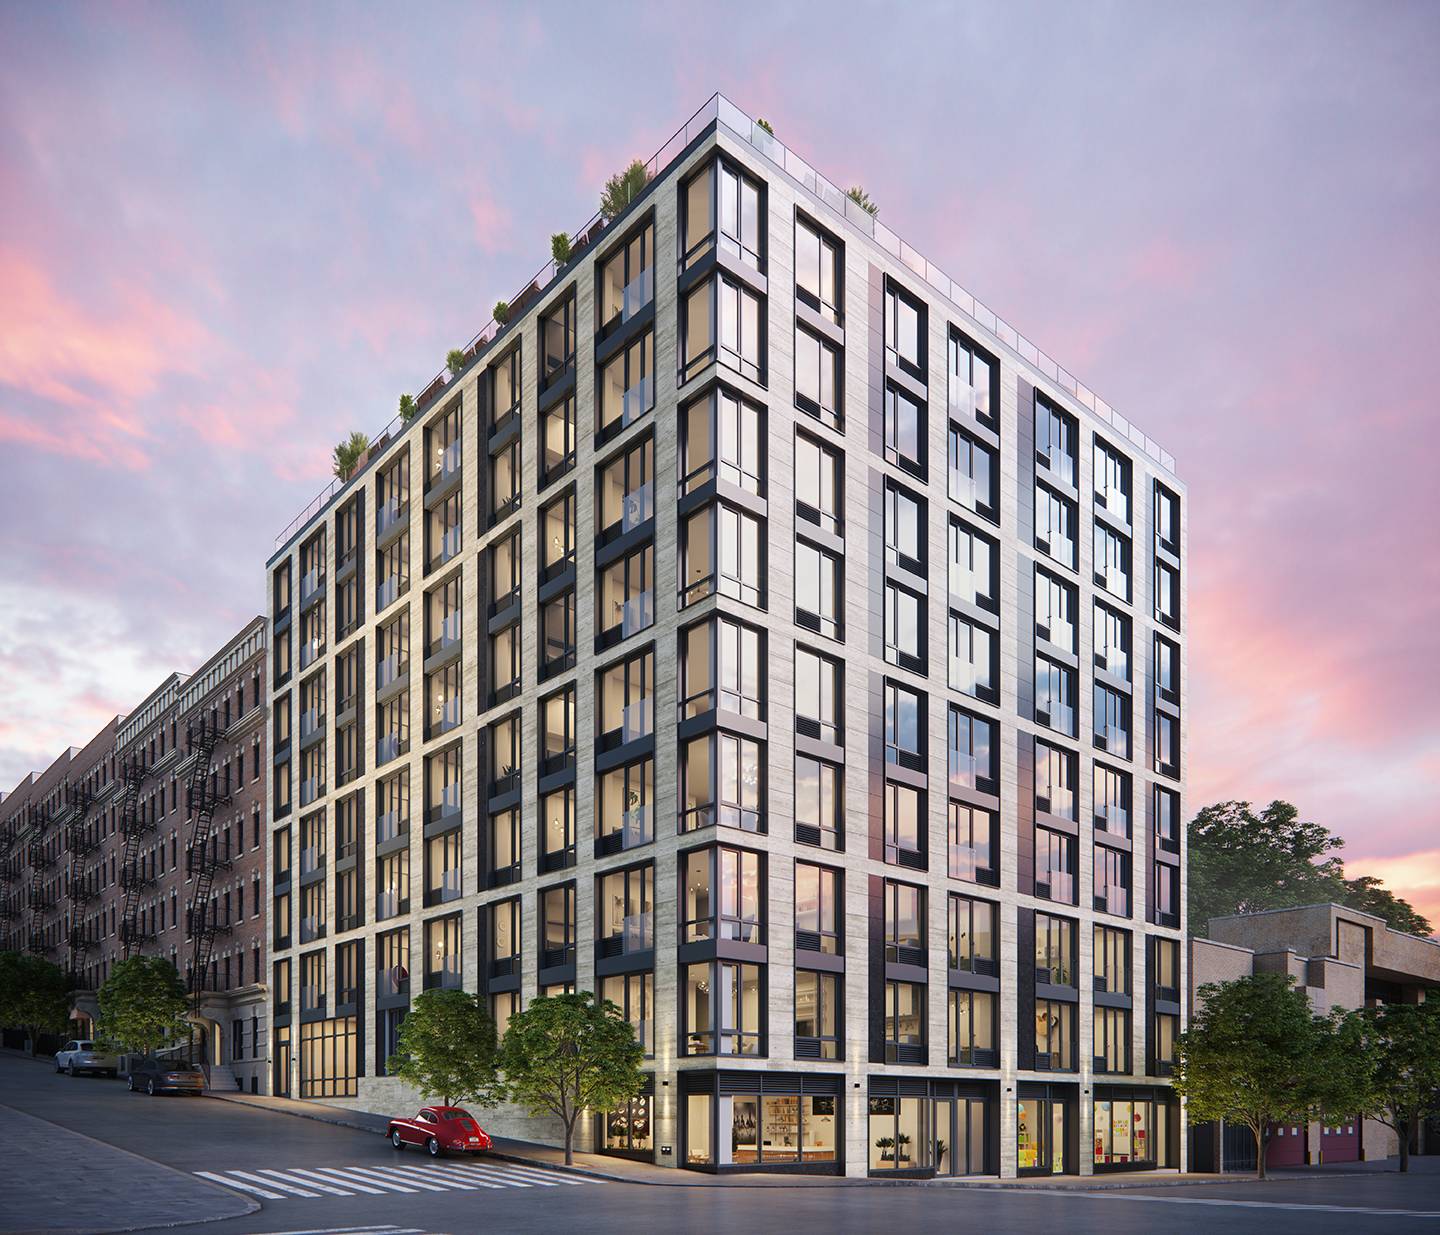 IMMEDIATE OCCUPANCY Move right into this stunning 3 bedroom, 2 bathroom home and enjoy a contemporary lifestyle at East Harlem's newest development.